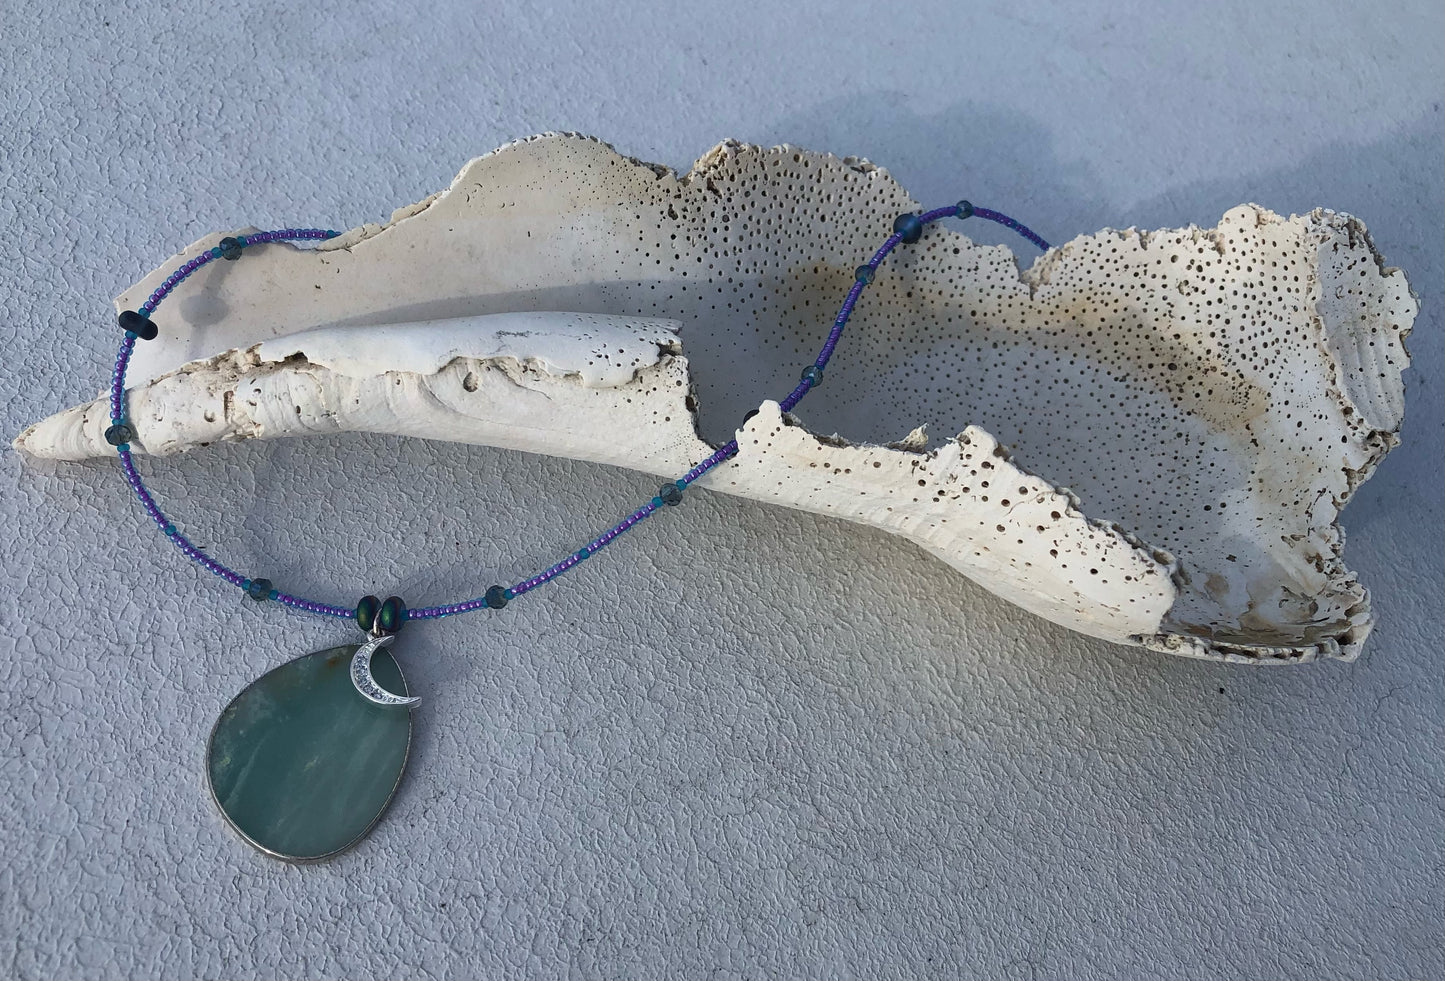 Amazonite Pendant, Clear Crystal New Moon Charm, & Sparkly Glass Seed Beads